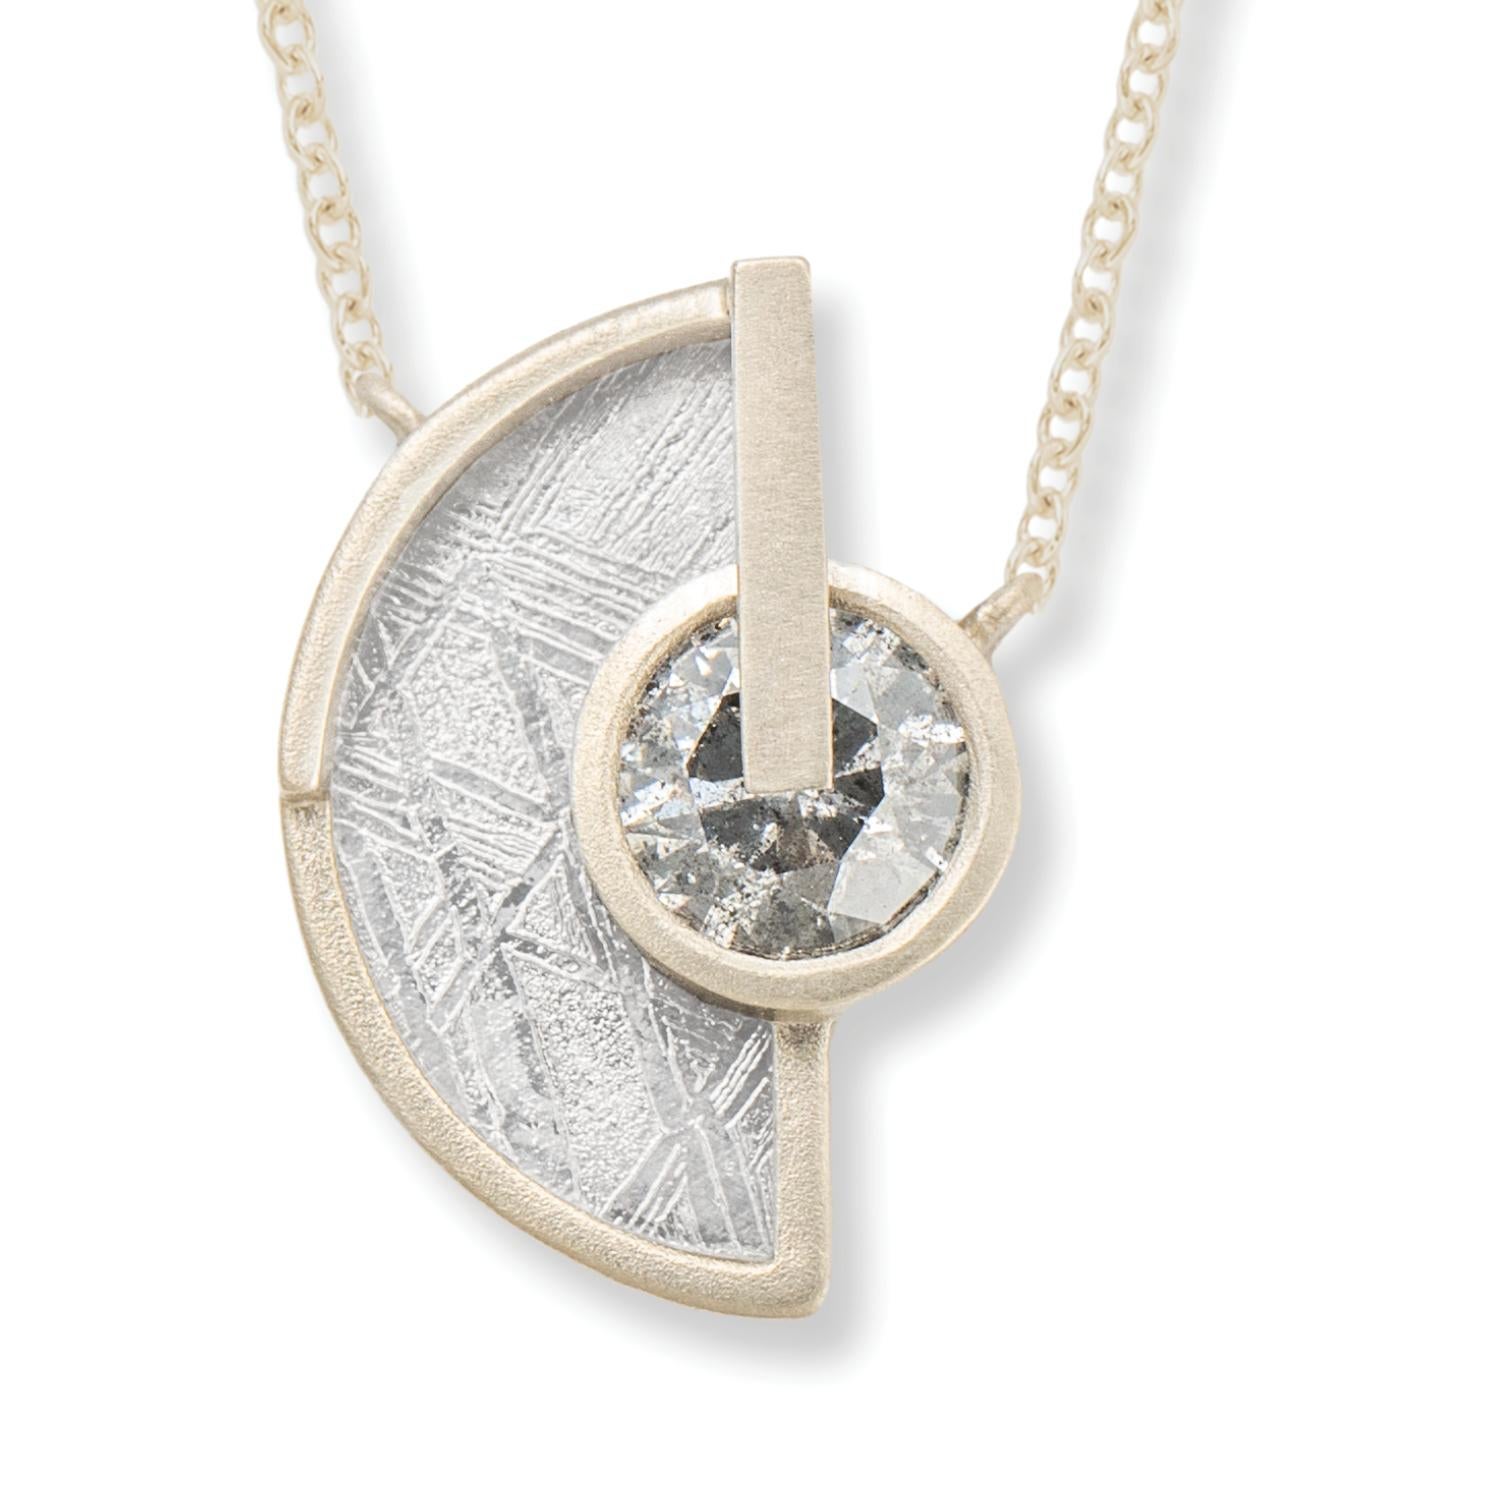 Widmanstätten pattern meteorite slice and gray semi-transparent round brilliant cut diamond arc necklace, 17 inches, 18 carat recycled white gold, 0.43 TCW  - One-of-a-kind

Inspired by the intersection of Earth and sky, this arc necklace features a